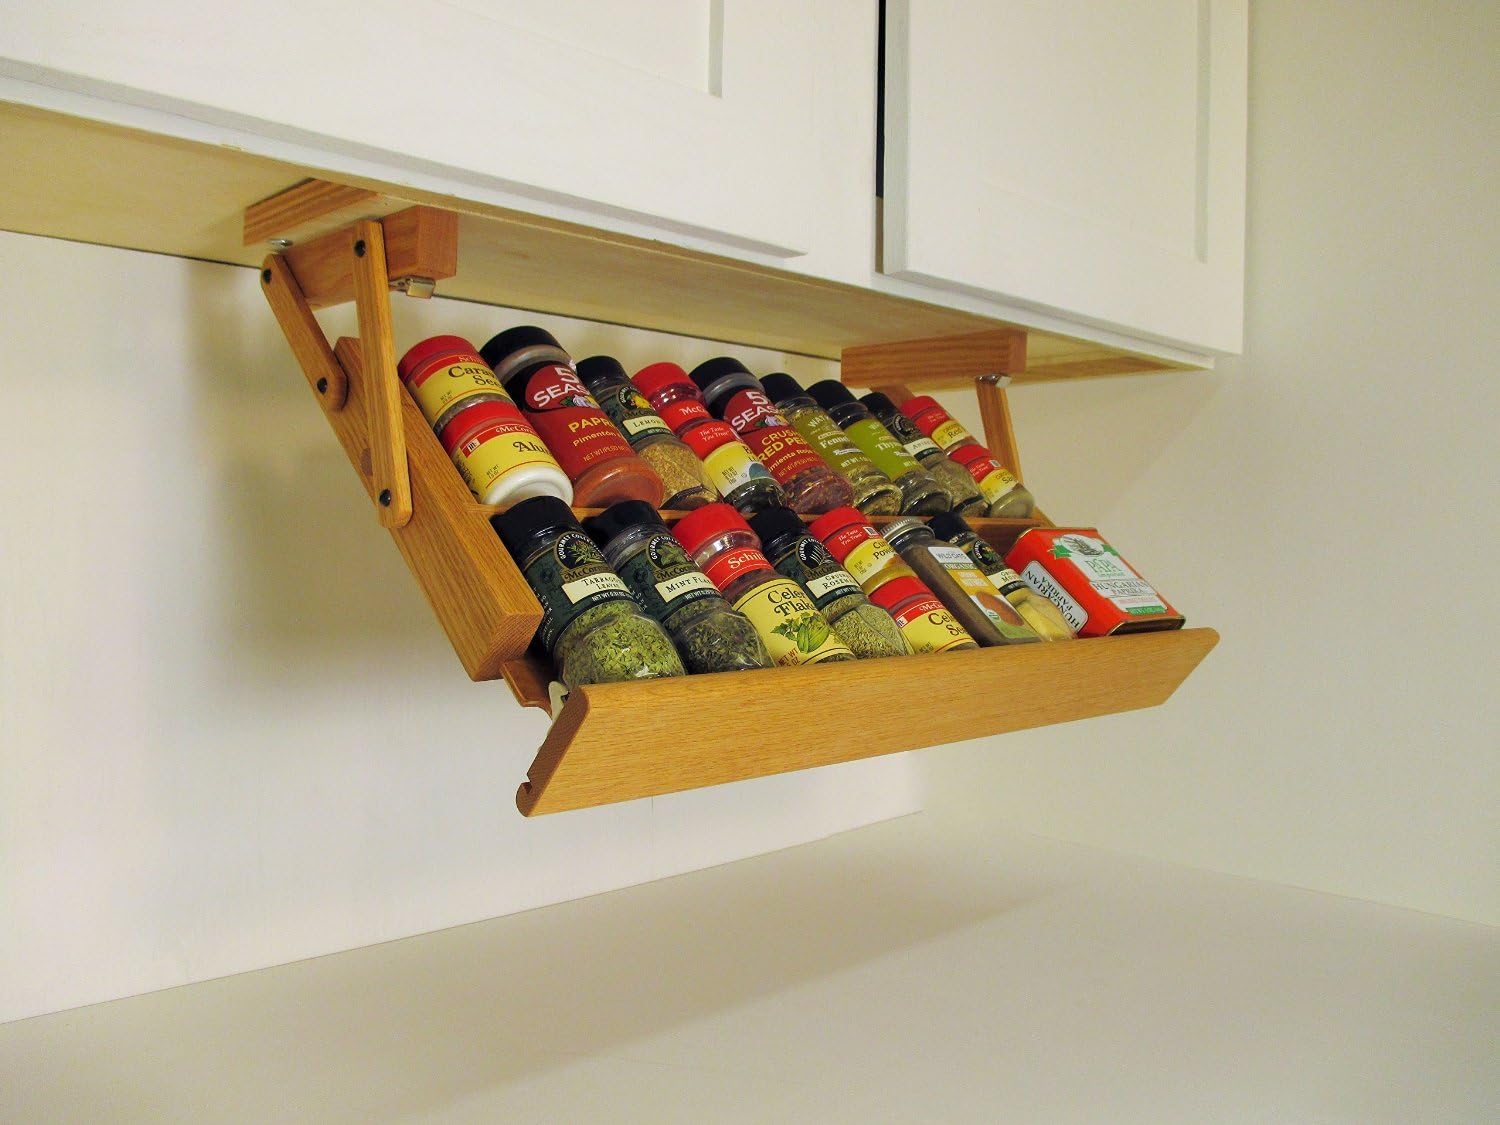  cabinet under spice rack parallel imported goods 